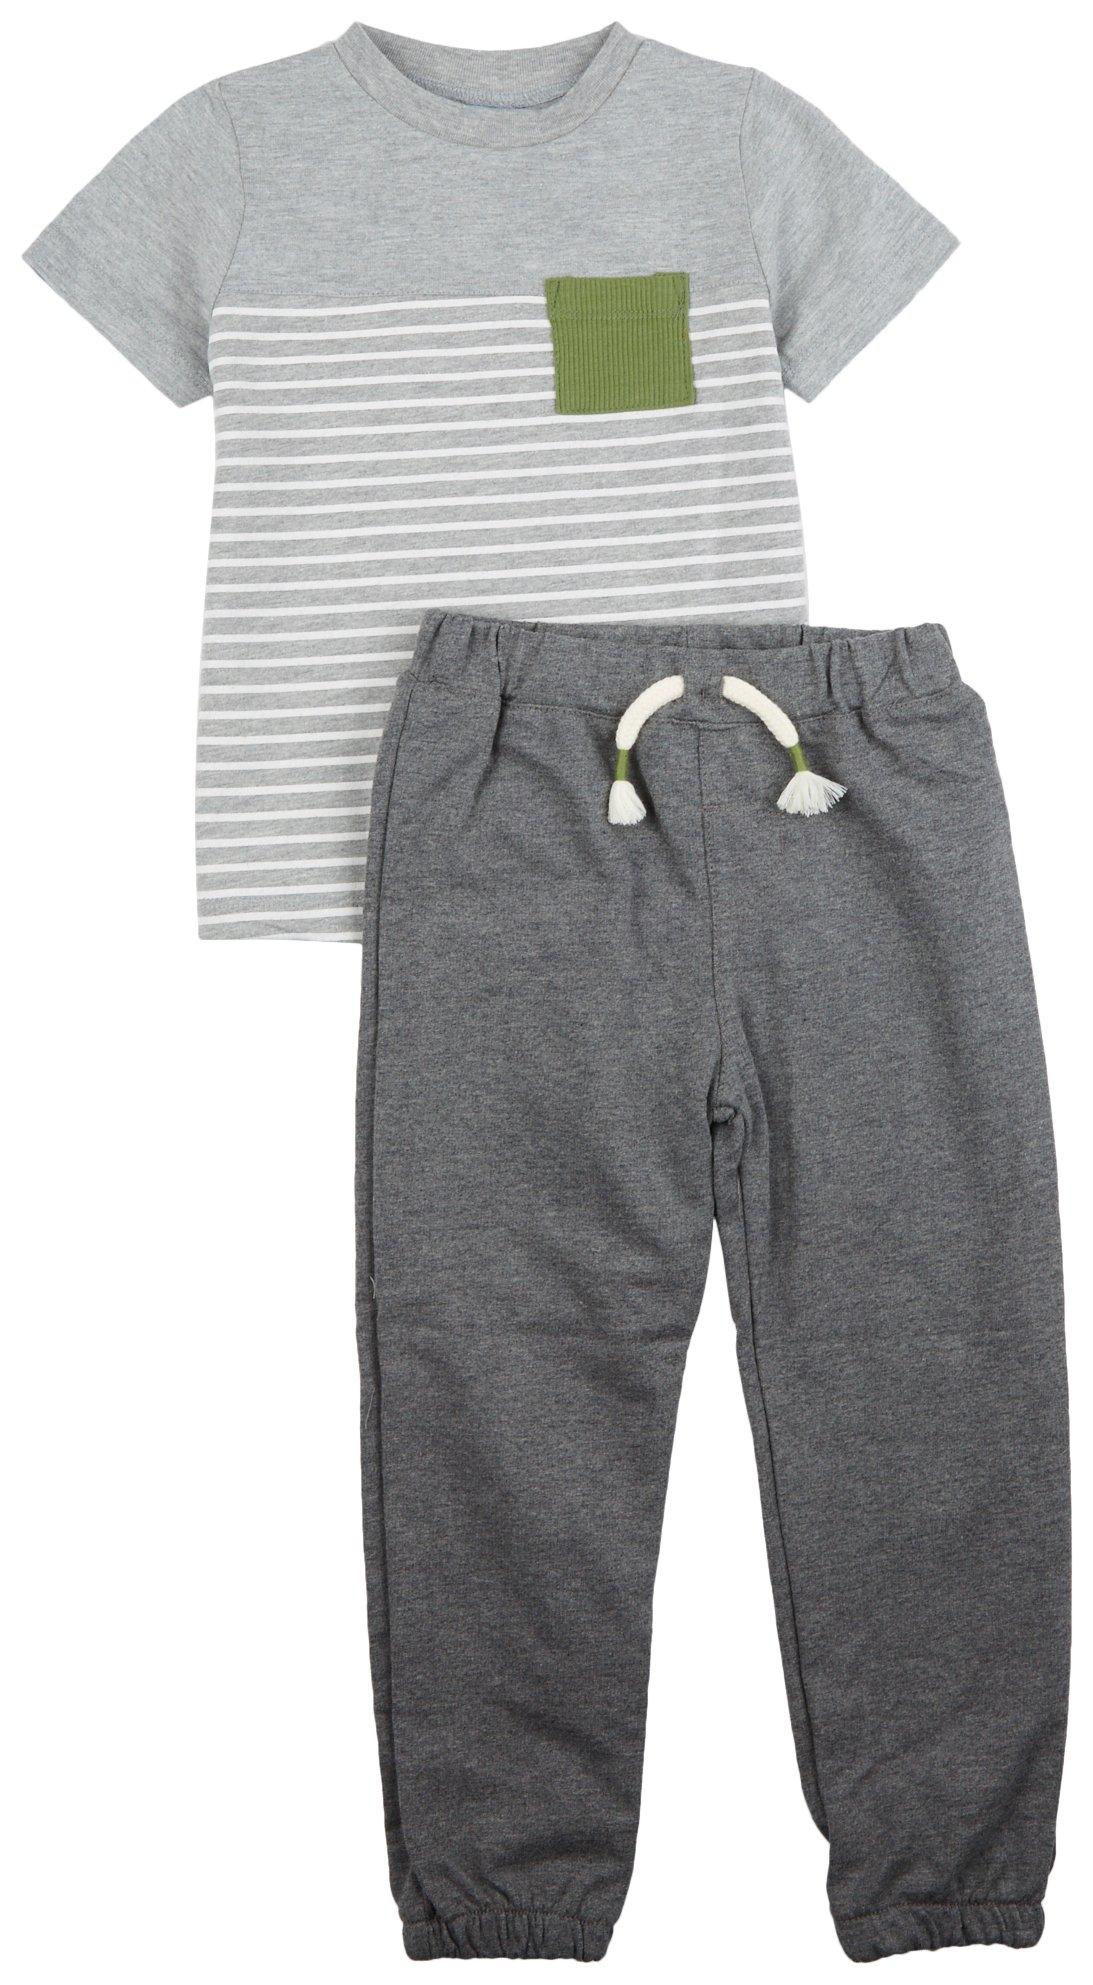 Toddler Boys 2-Pc. Stripe Top And Jogger Set